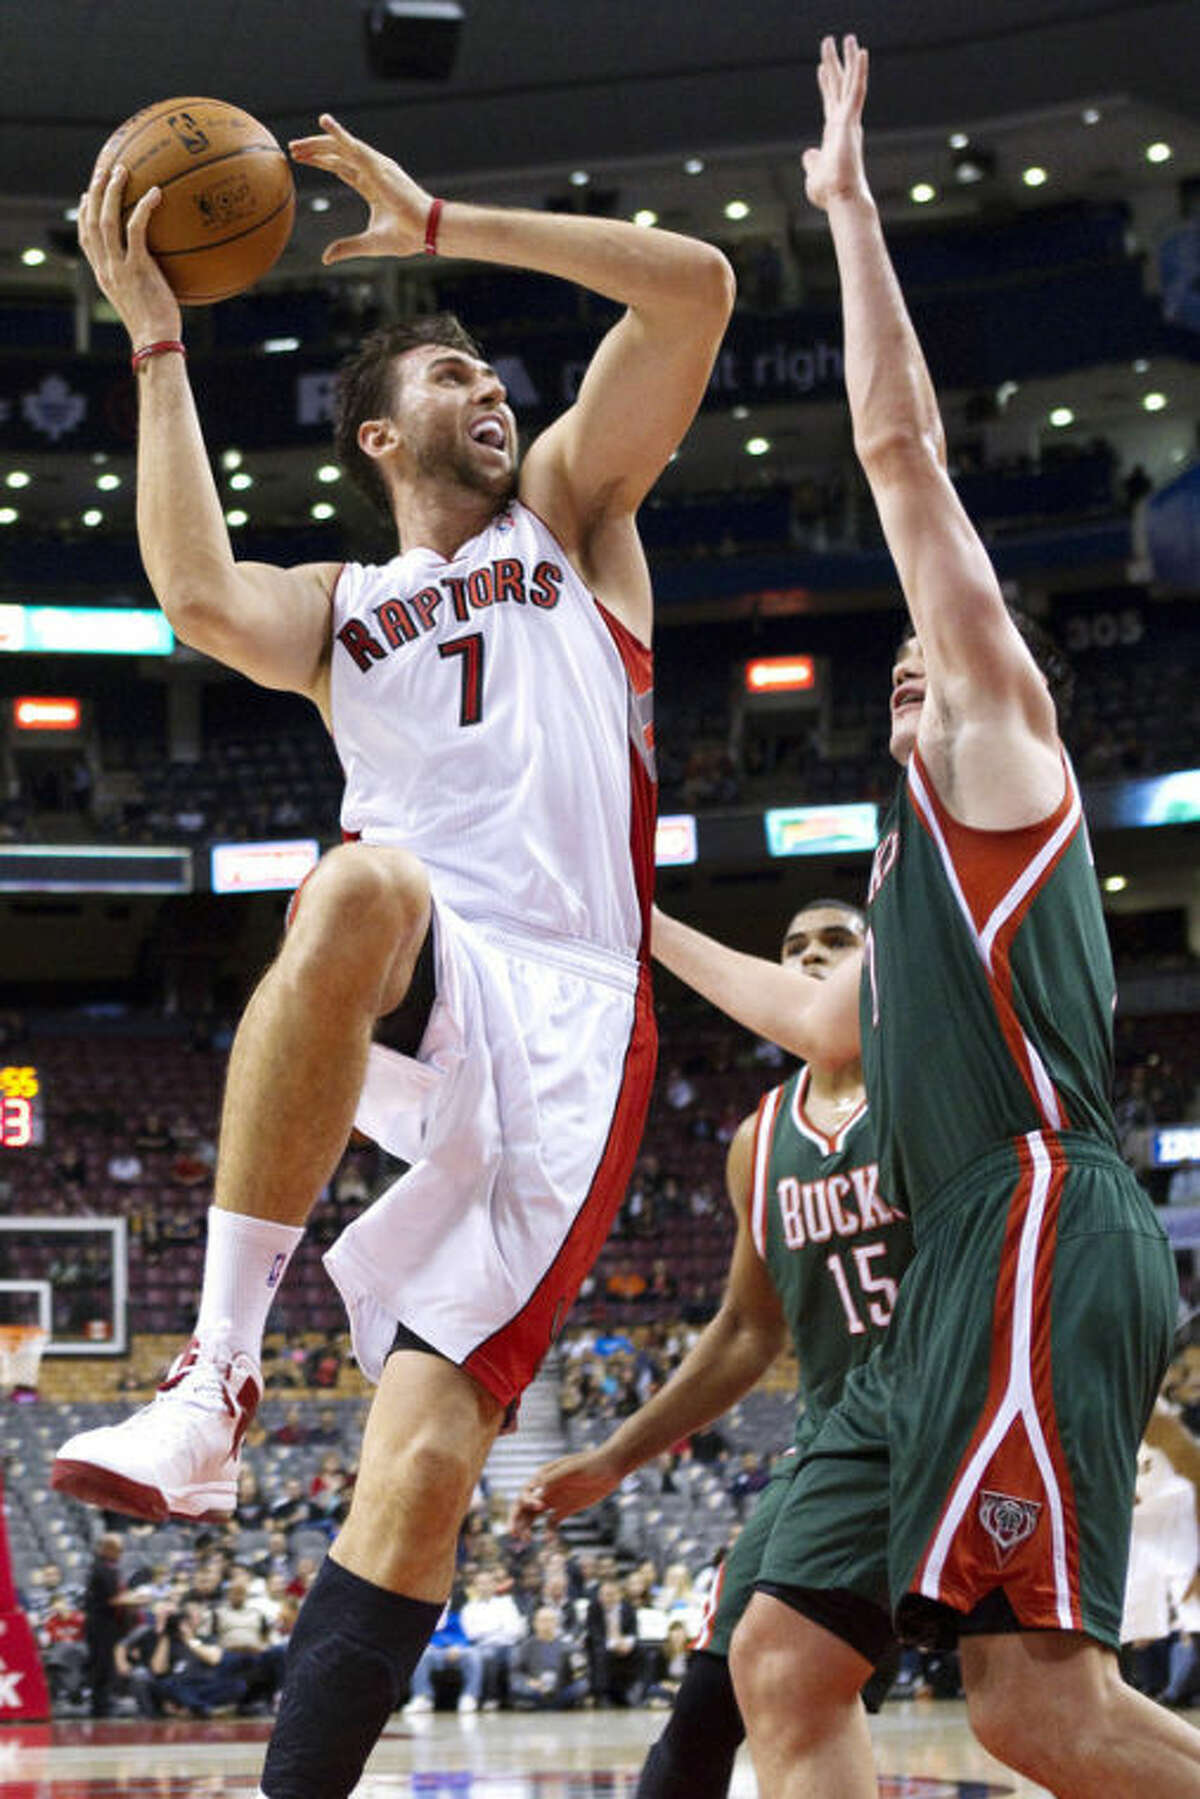 FILE - In this Oct. 22, 2012, file photo, Toronto Raptors' Andrea Bargnani (7) shoots as Milwaukee Bucks' Ersan Ilyasova defends during a preseason NBA basketball game in Toronto. The New York Knicks acquired Bargnani, a former No. 1 overall pick, from Toronto on Wednesday, July 10, 2013, for forwards Steve Novak and Quentin Richardson and center Marcus Camby. The Knicks also sent the Raptors a 2016 first-round draft pick and second-round selections in 2014 and 2017. (AP Photo/The Canadian Press, Chris Young, File)